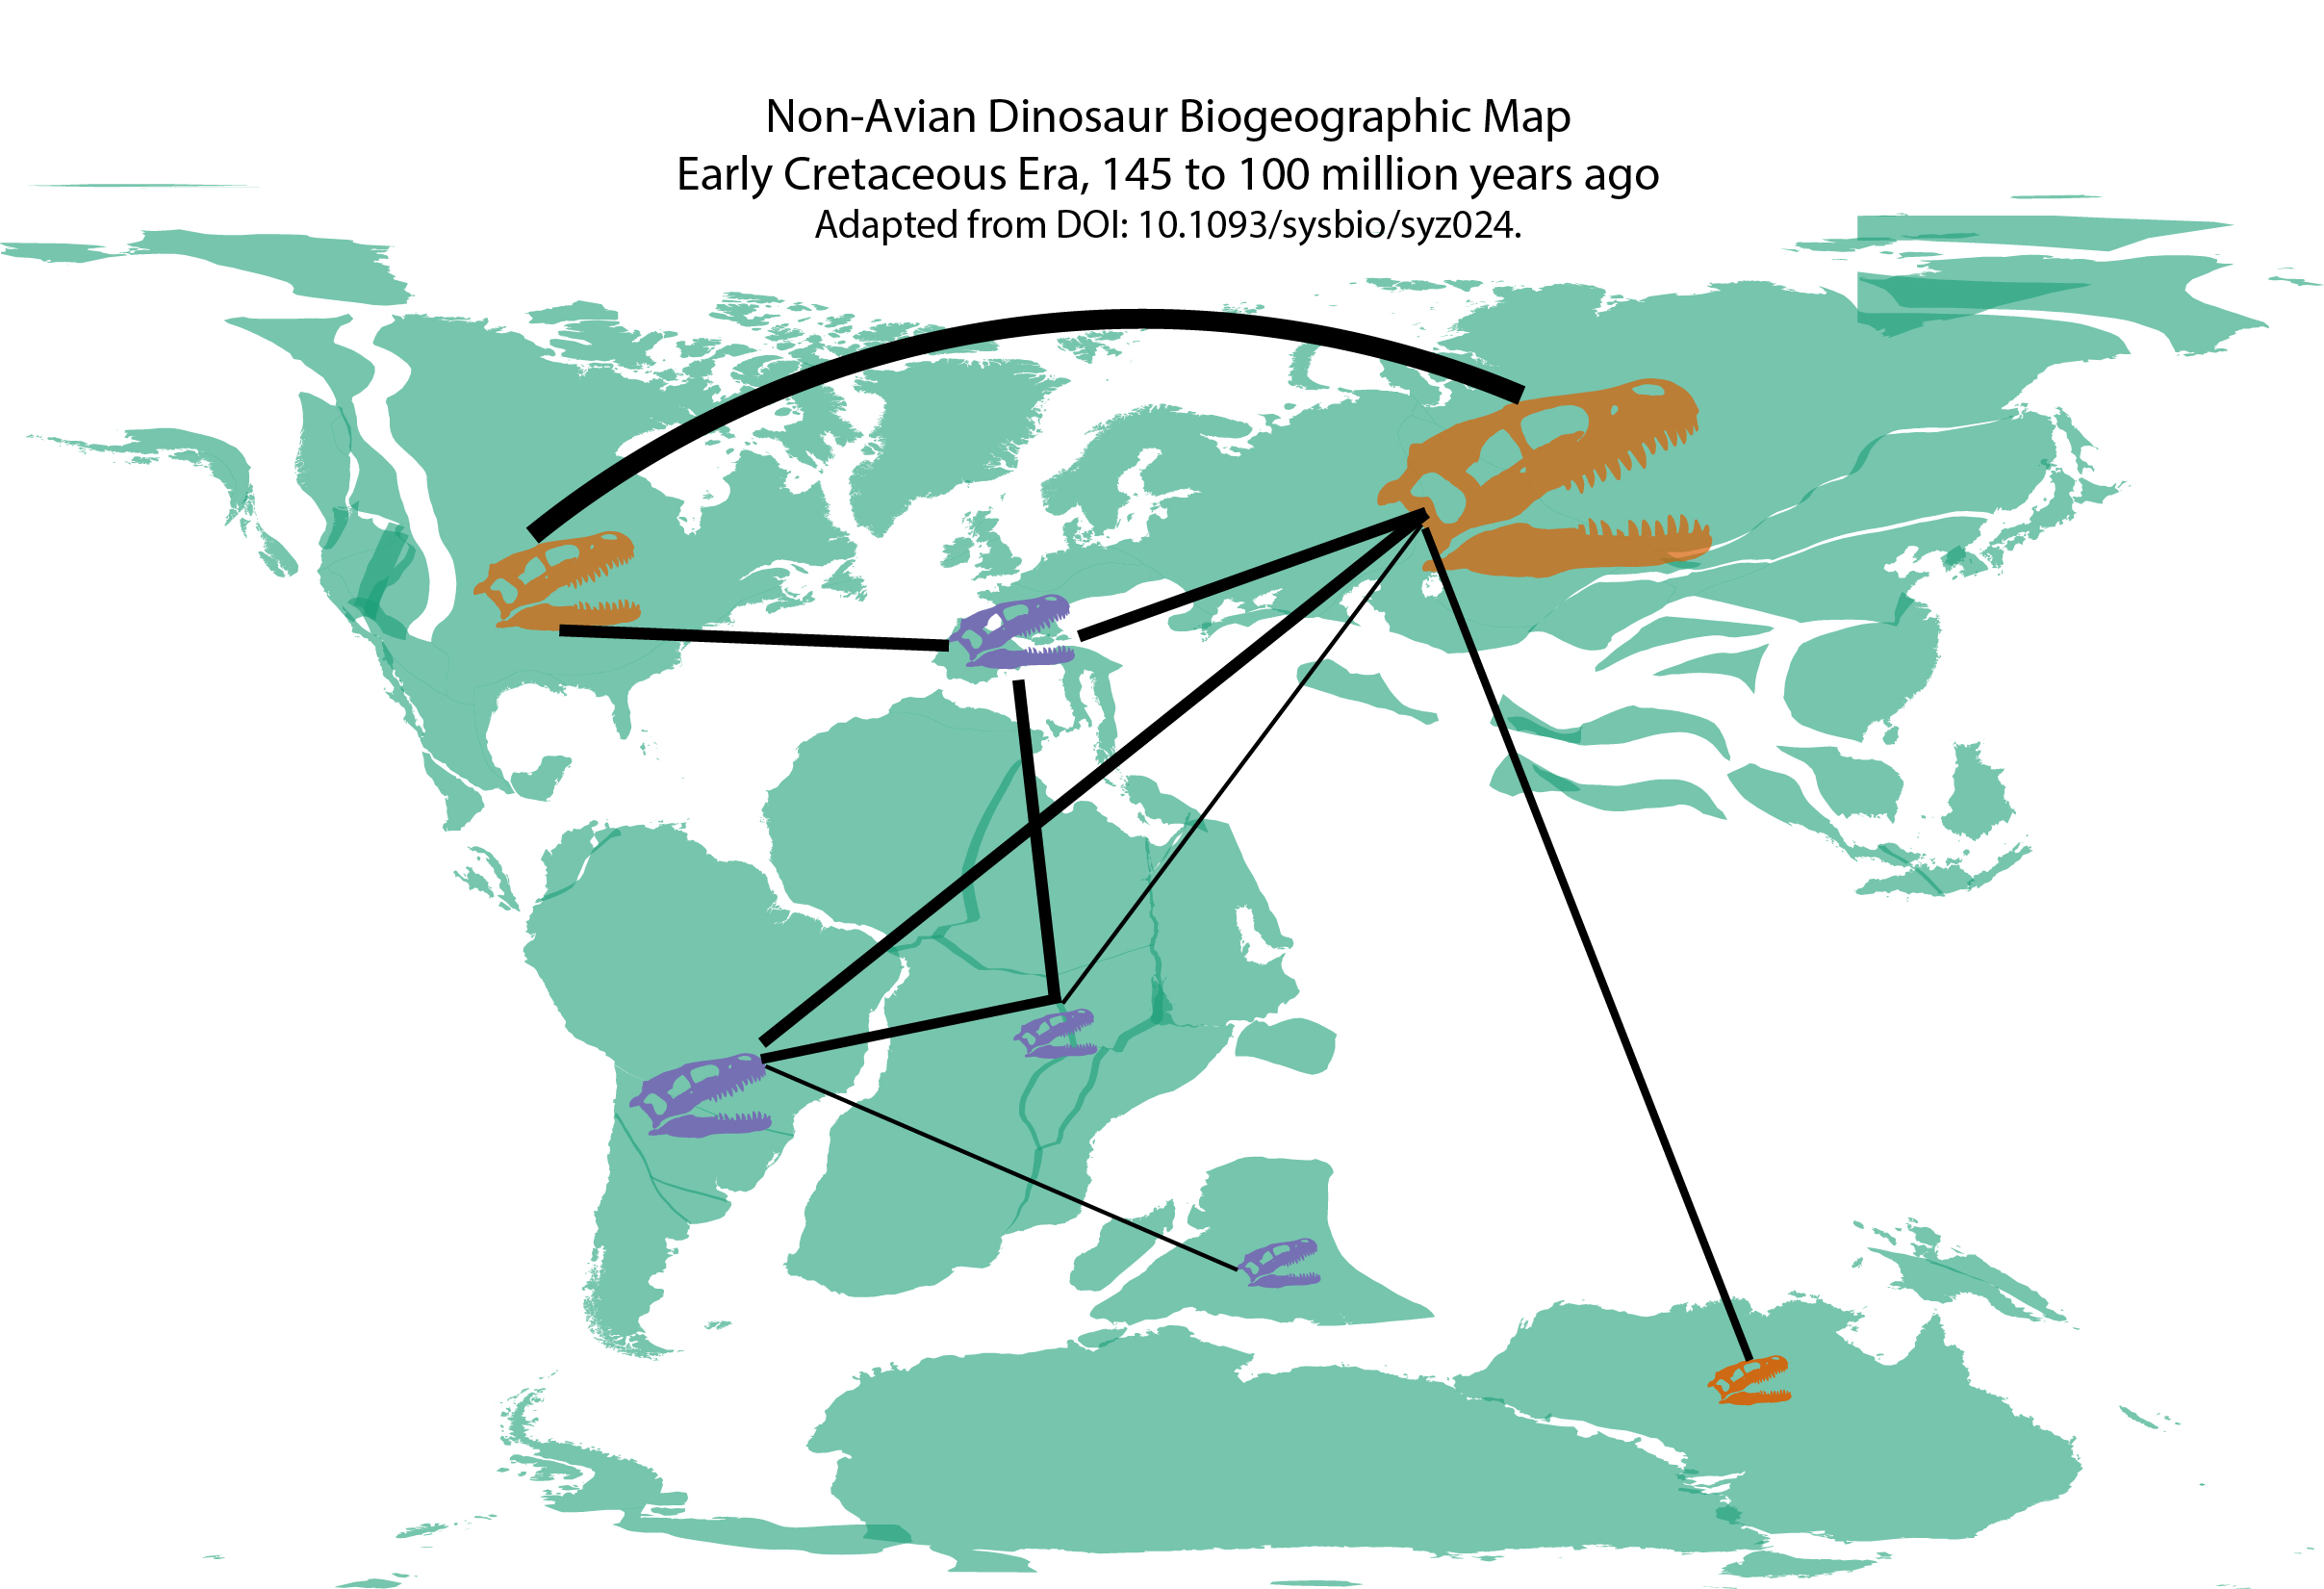 Early cretaceous biogeographical map of nonavian dinosaurs.